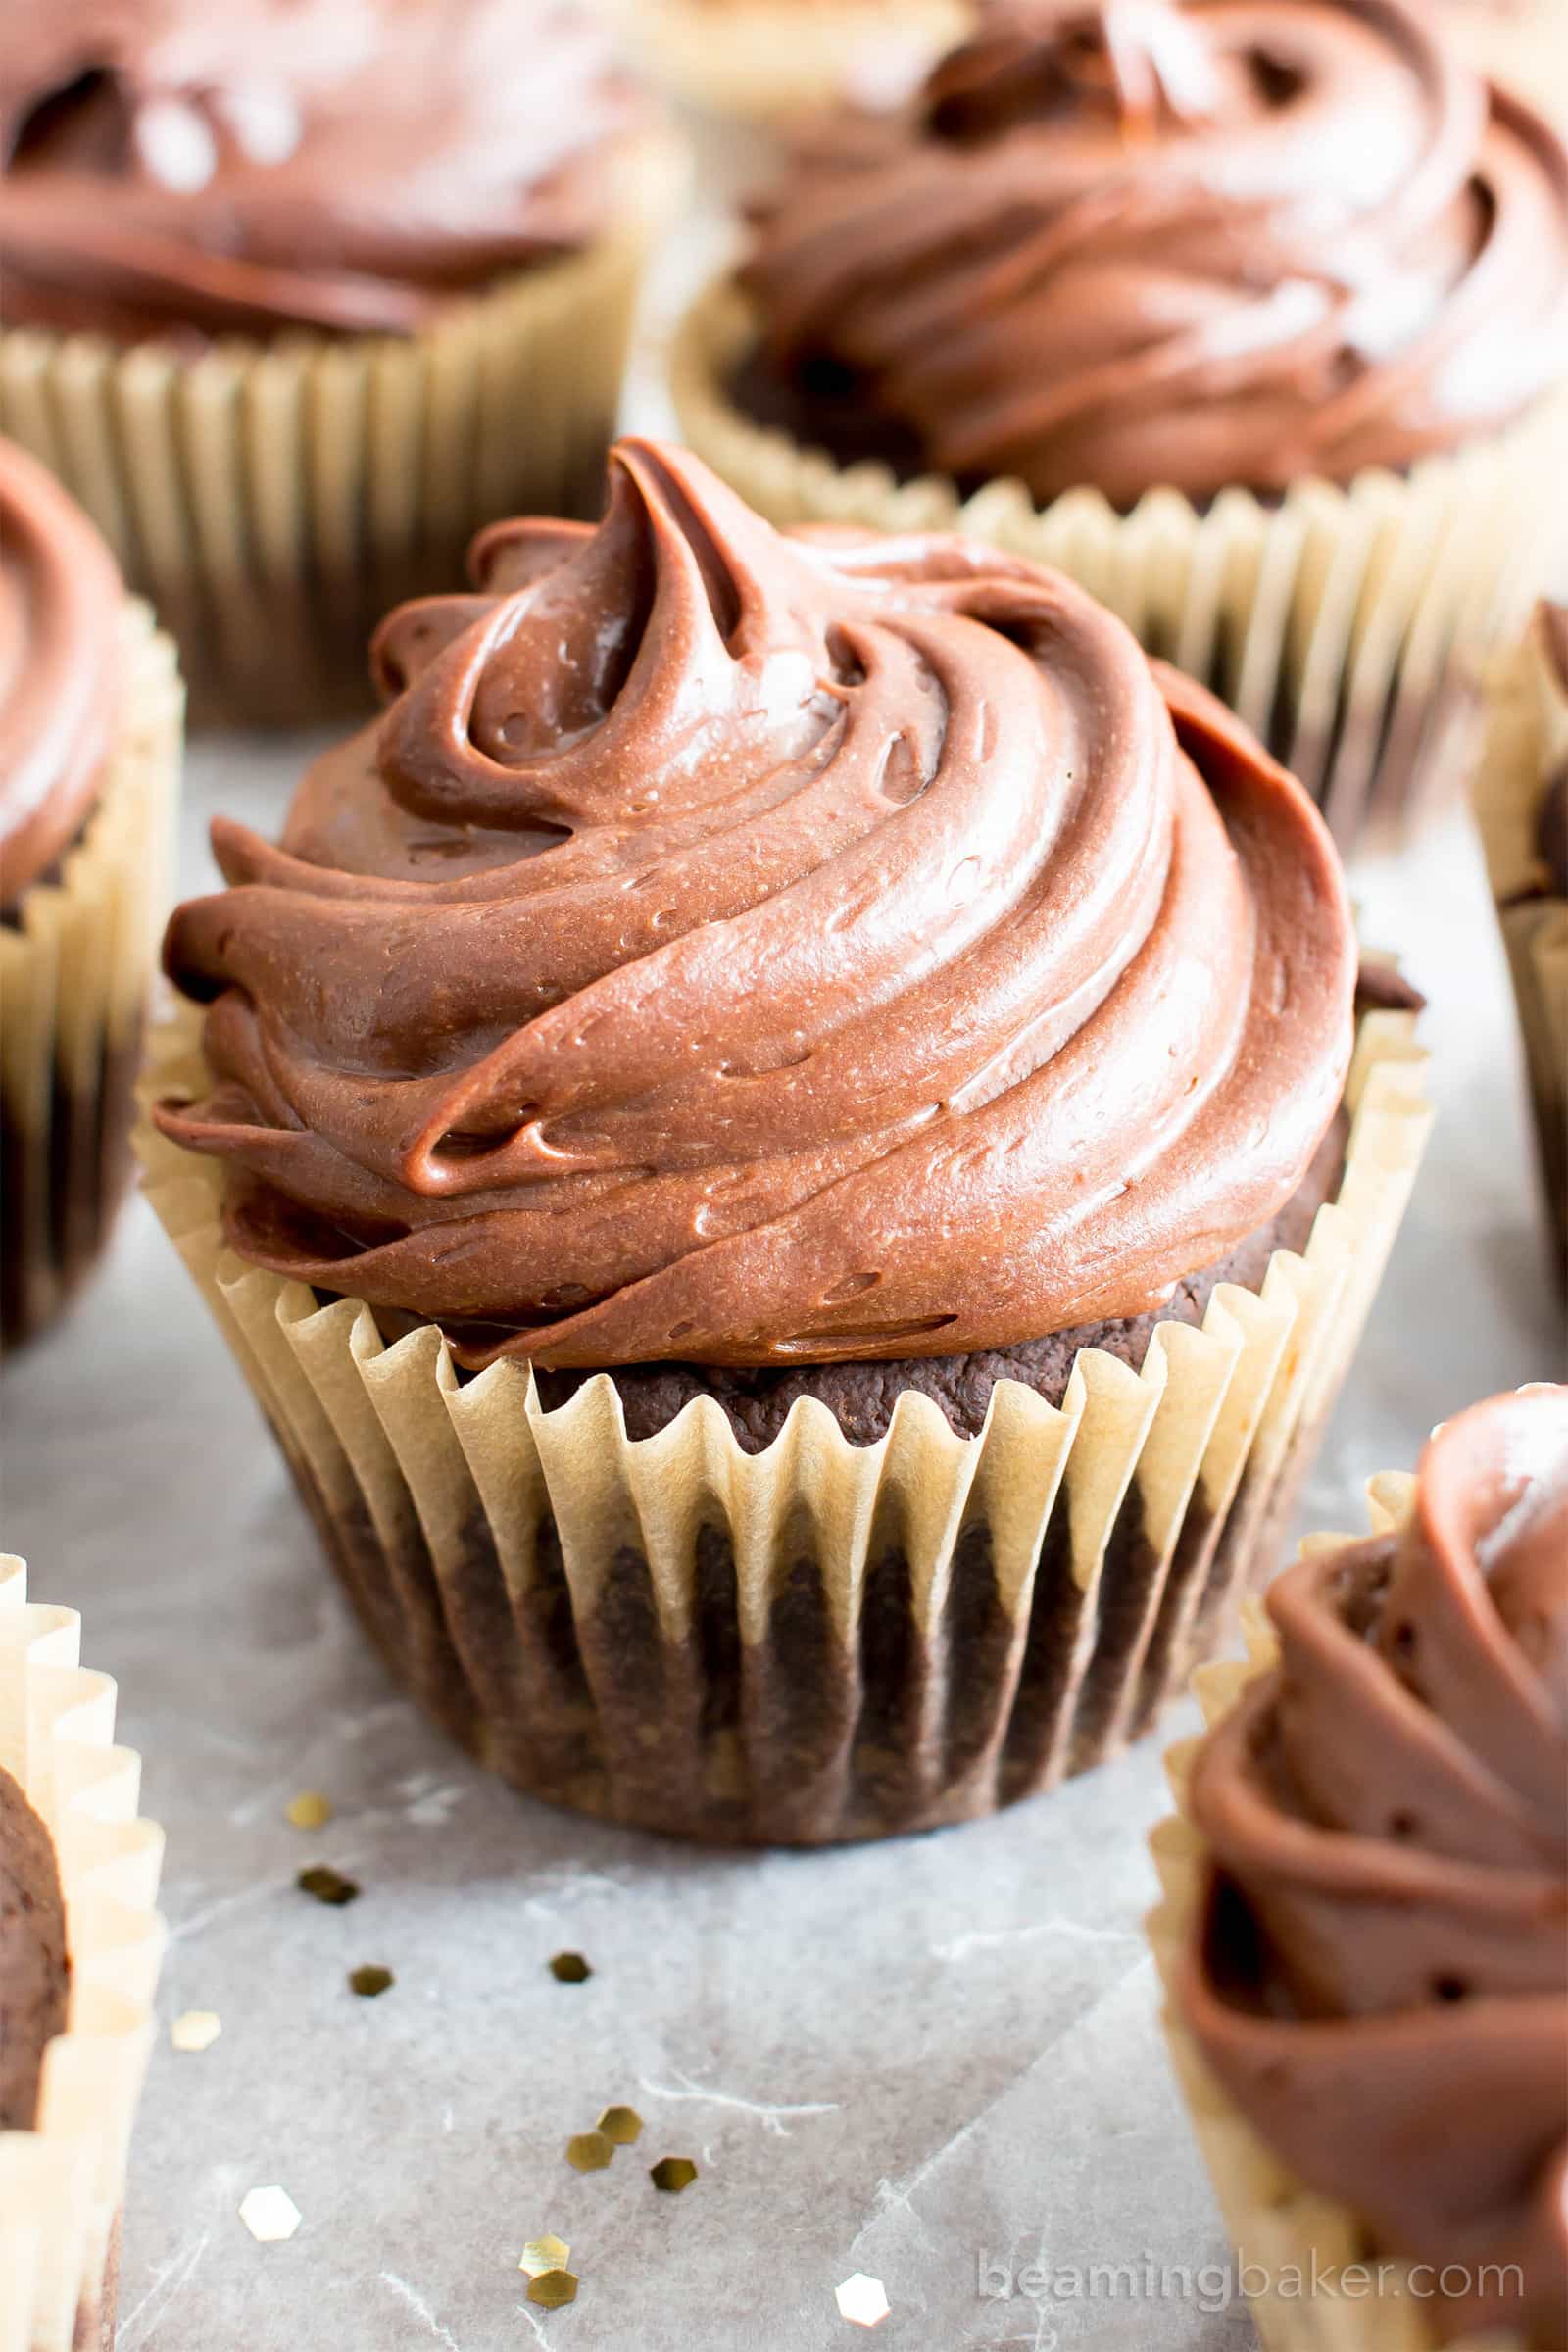 These vegan and gluten-free chocolate cupcakes are so decadent, you'll never know they've vegan!